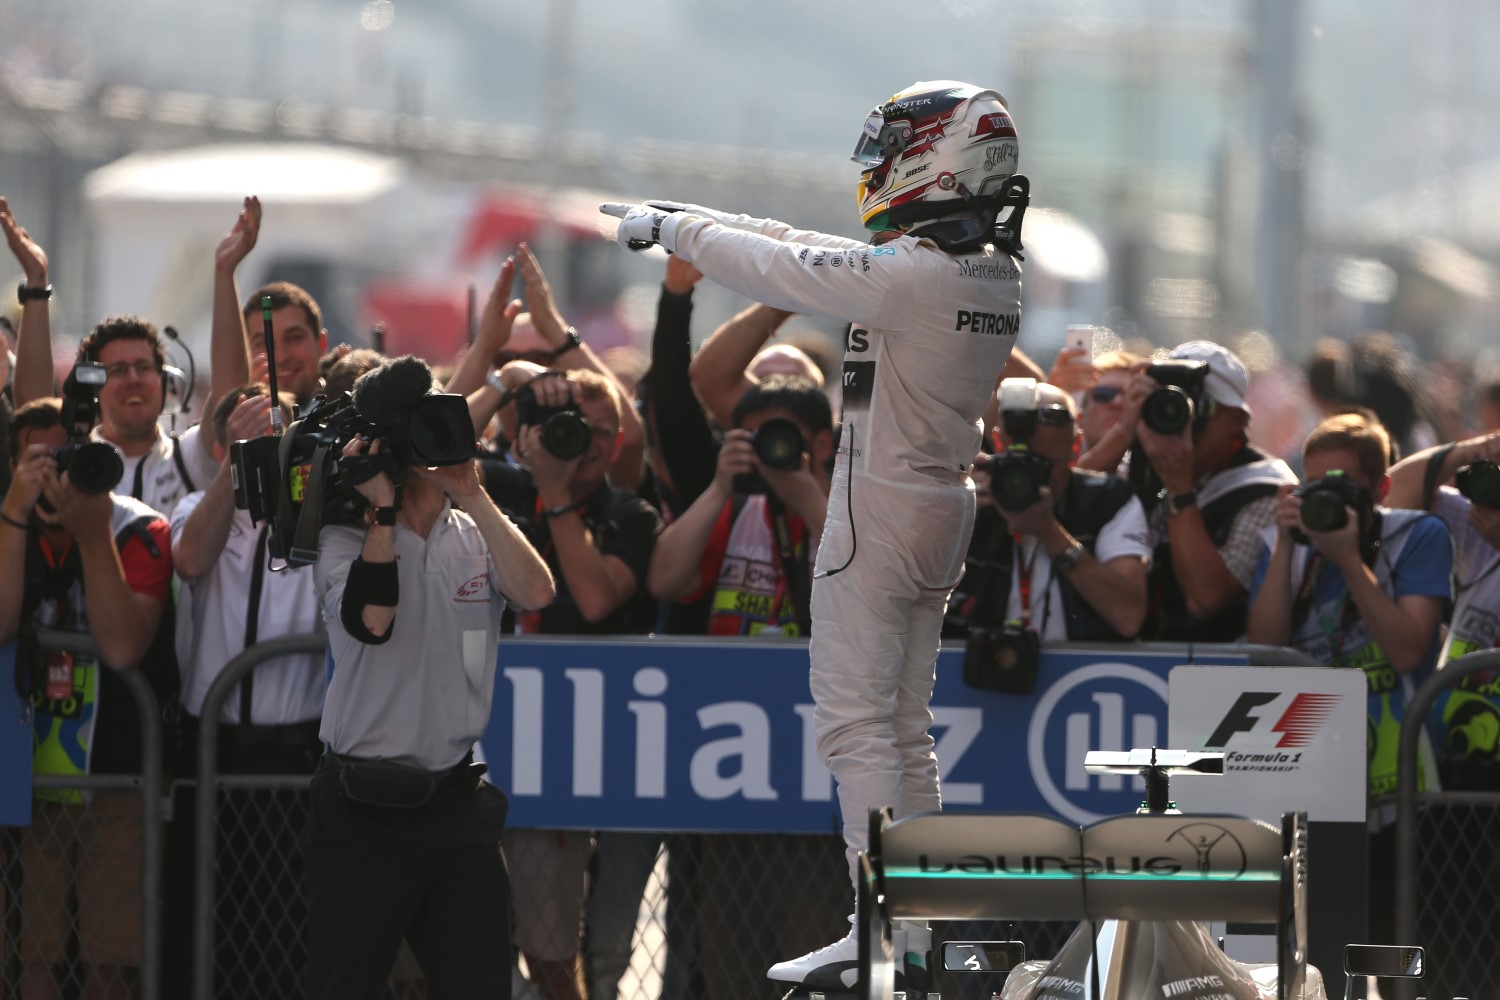 Lewis Hamilton should win most of the races this year